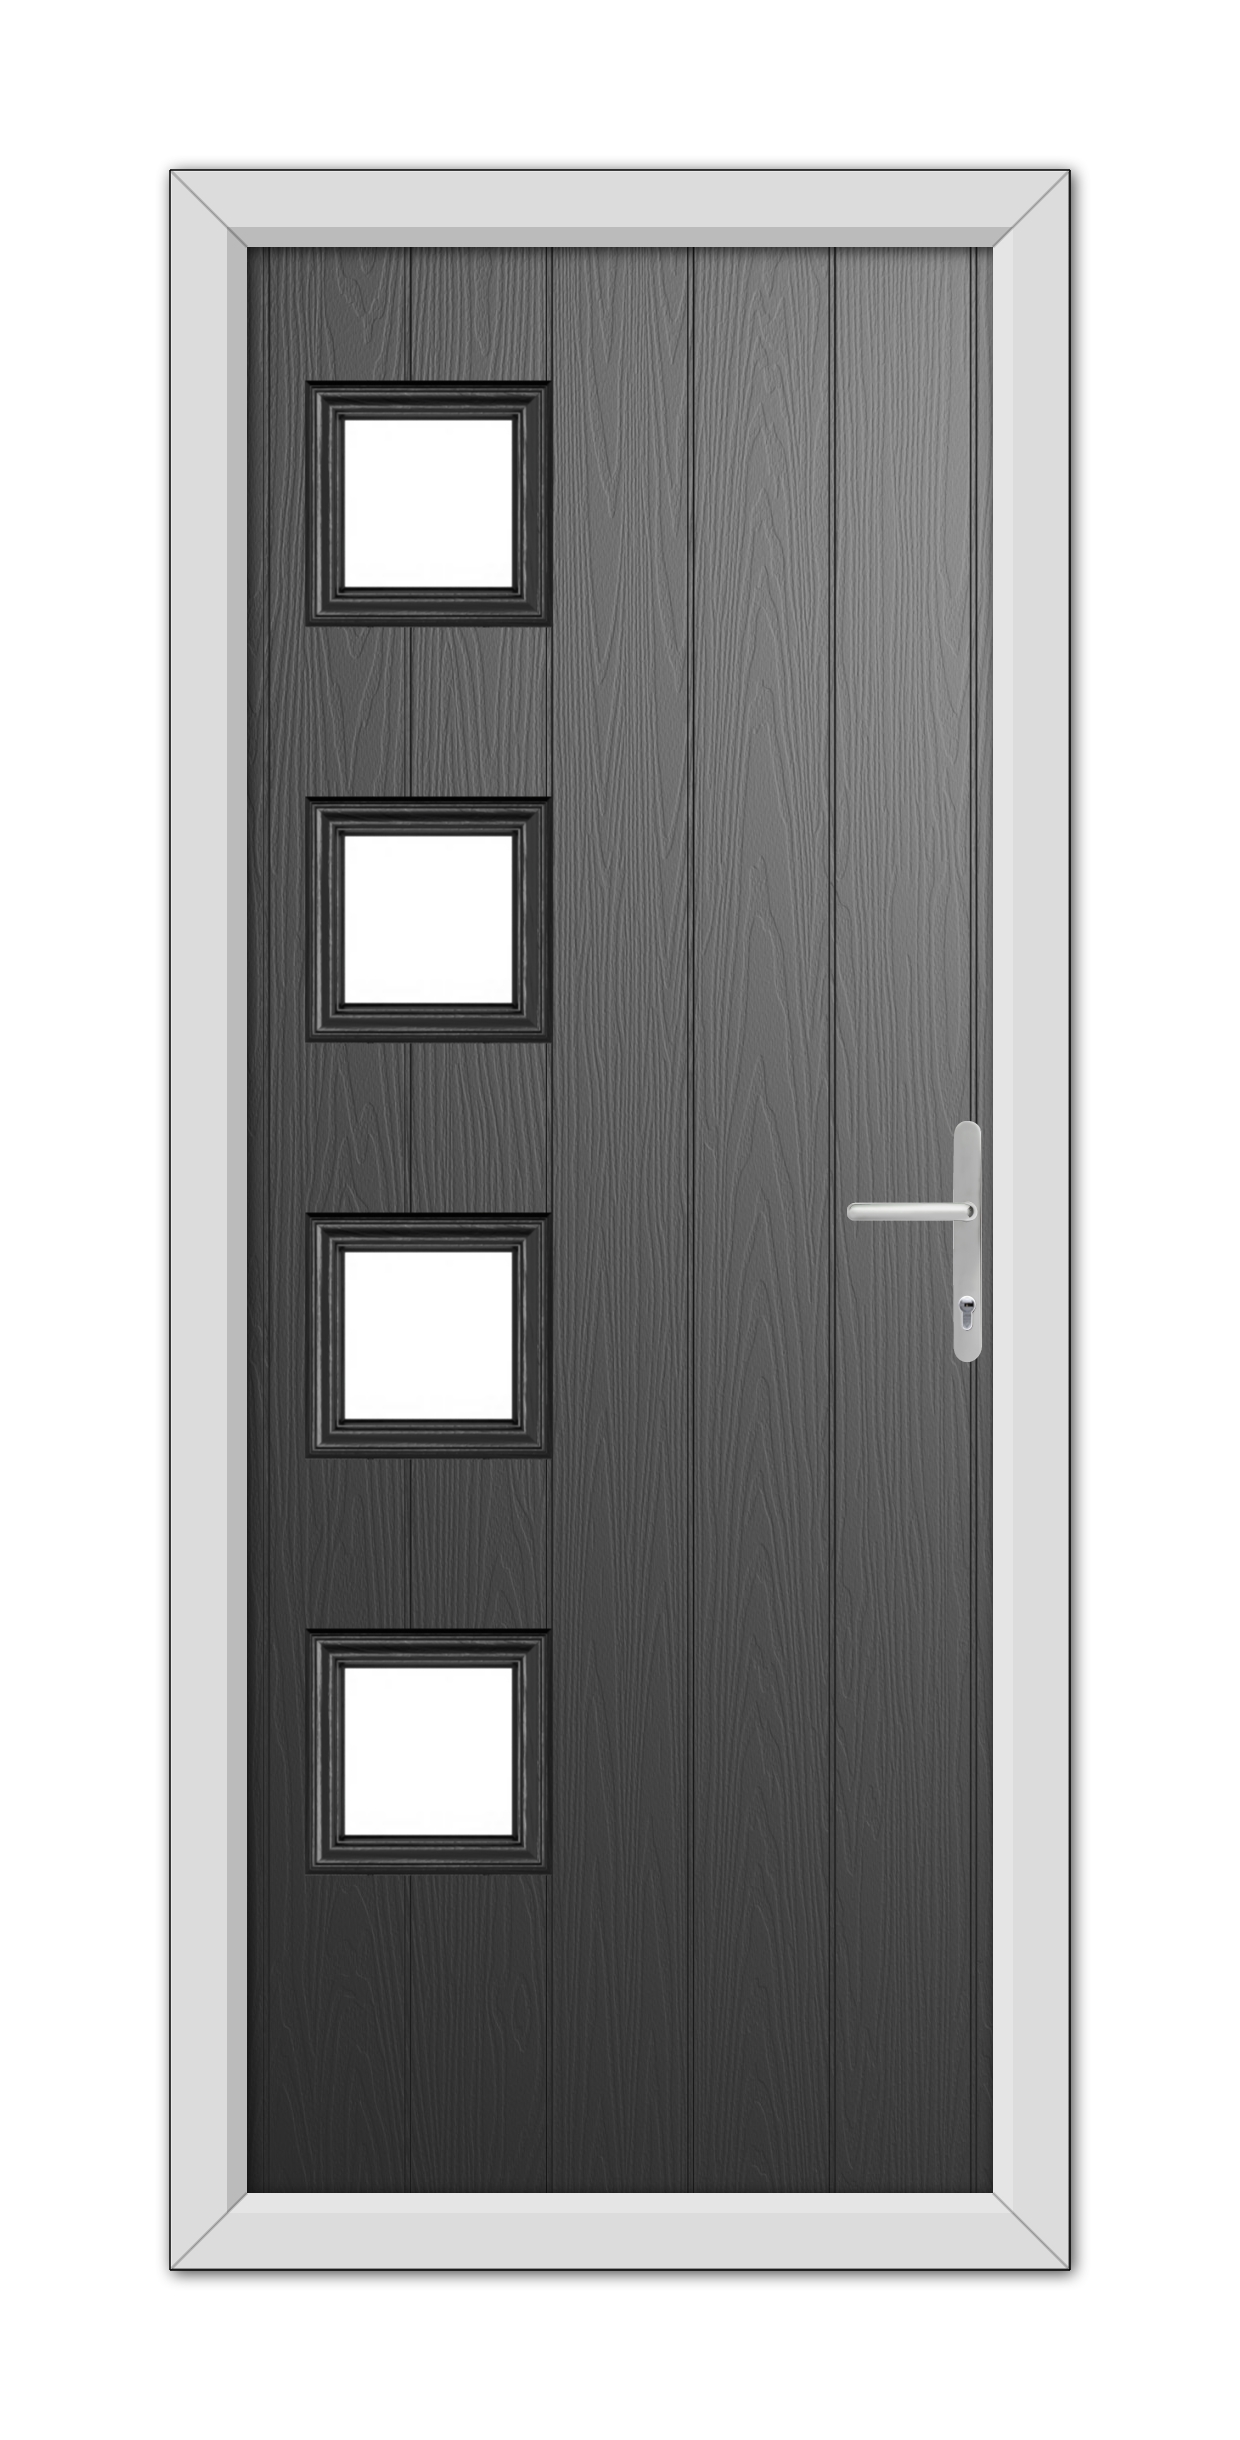 A modern Black Sussex Composite Door 48mm Timber Core featuring four rectangular glass panels and a metallic handle, set within a white frame.